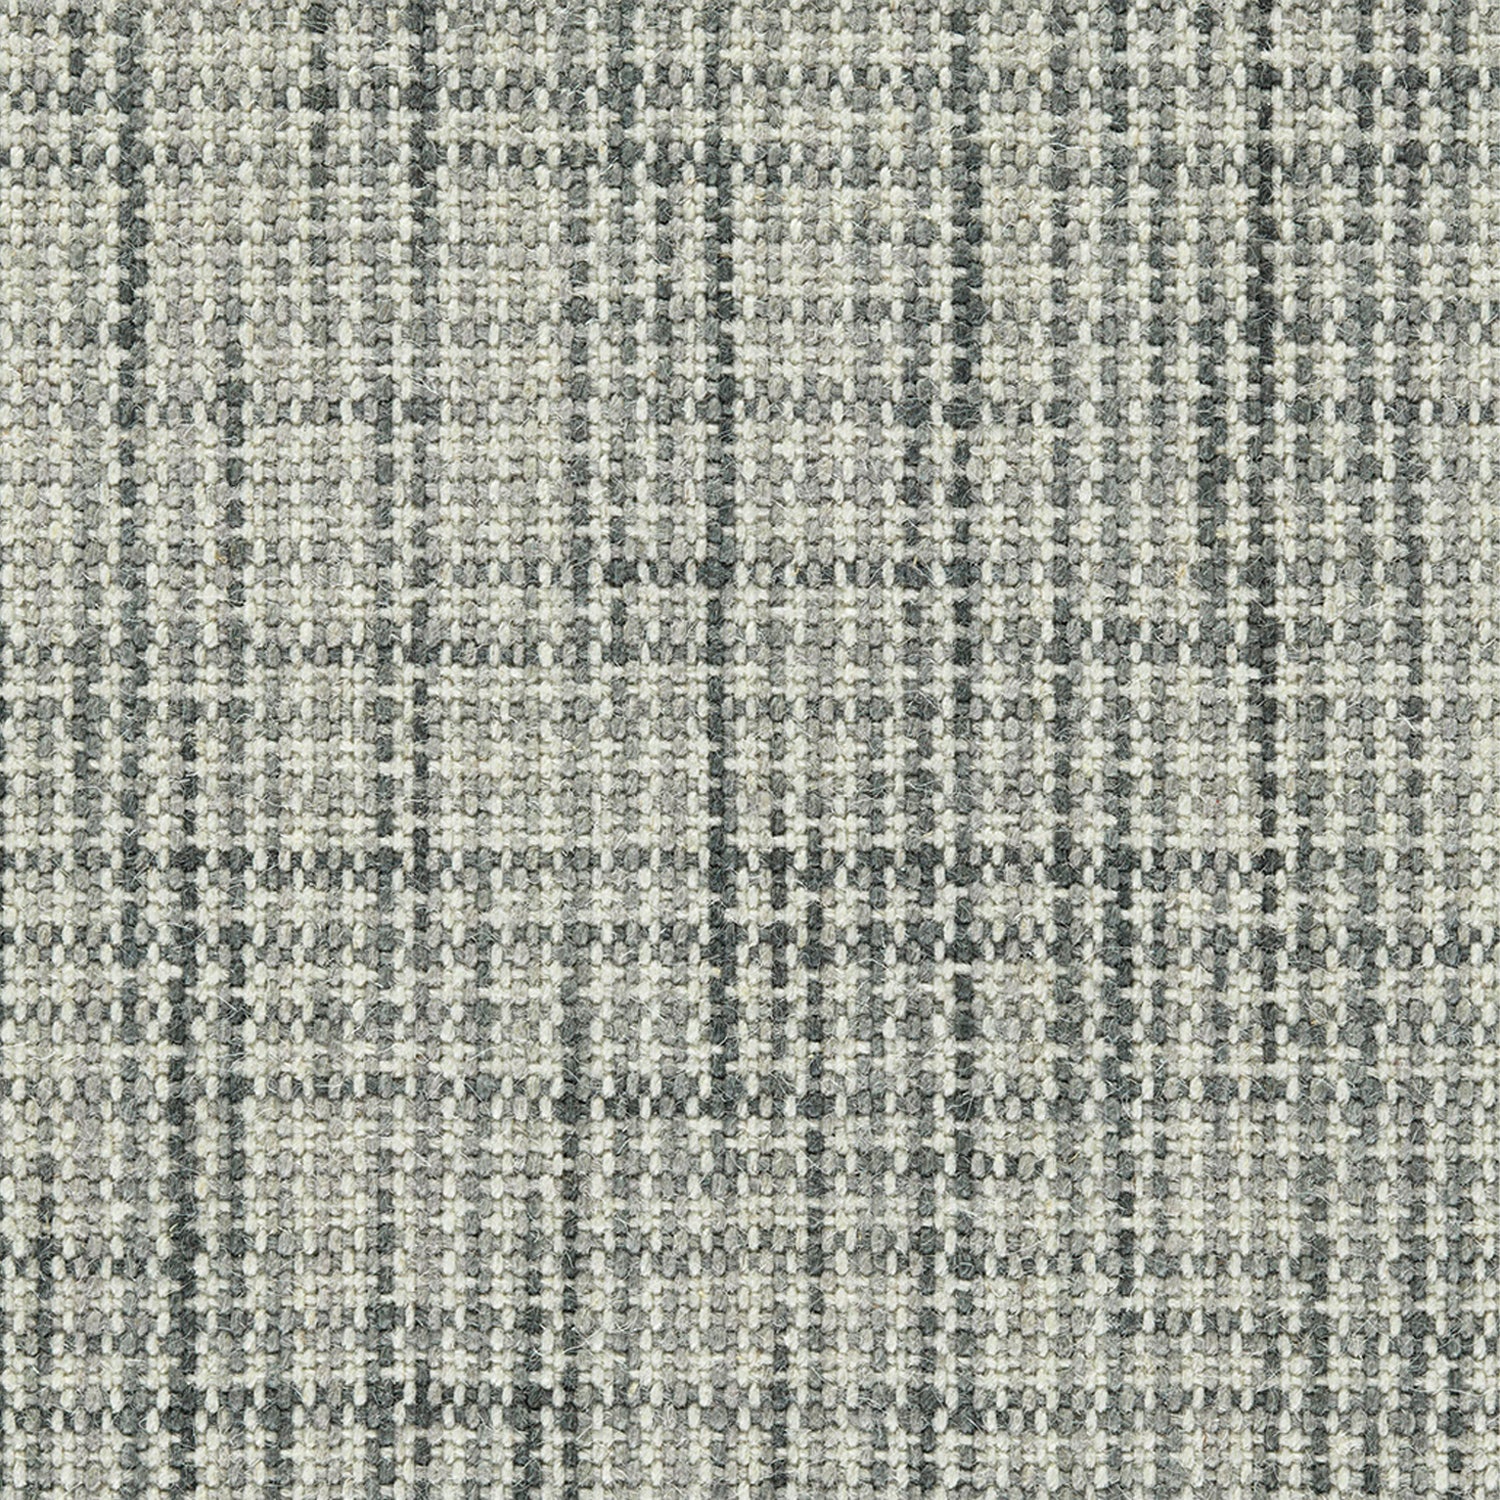 Wool broadloom carpet swatch in a chunky grid weave in mottled shades of white and gray.